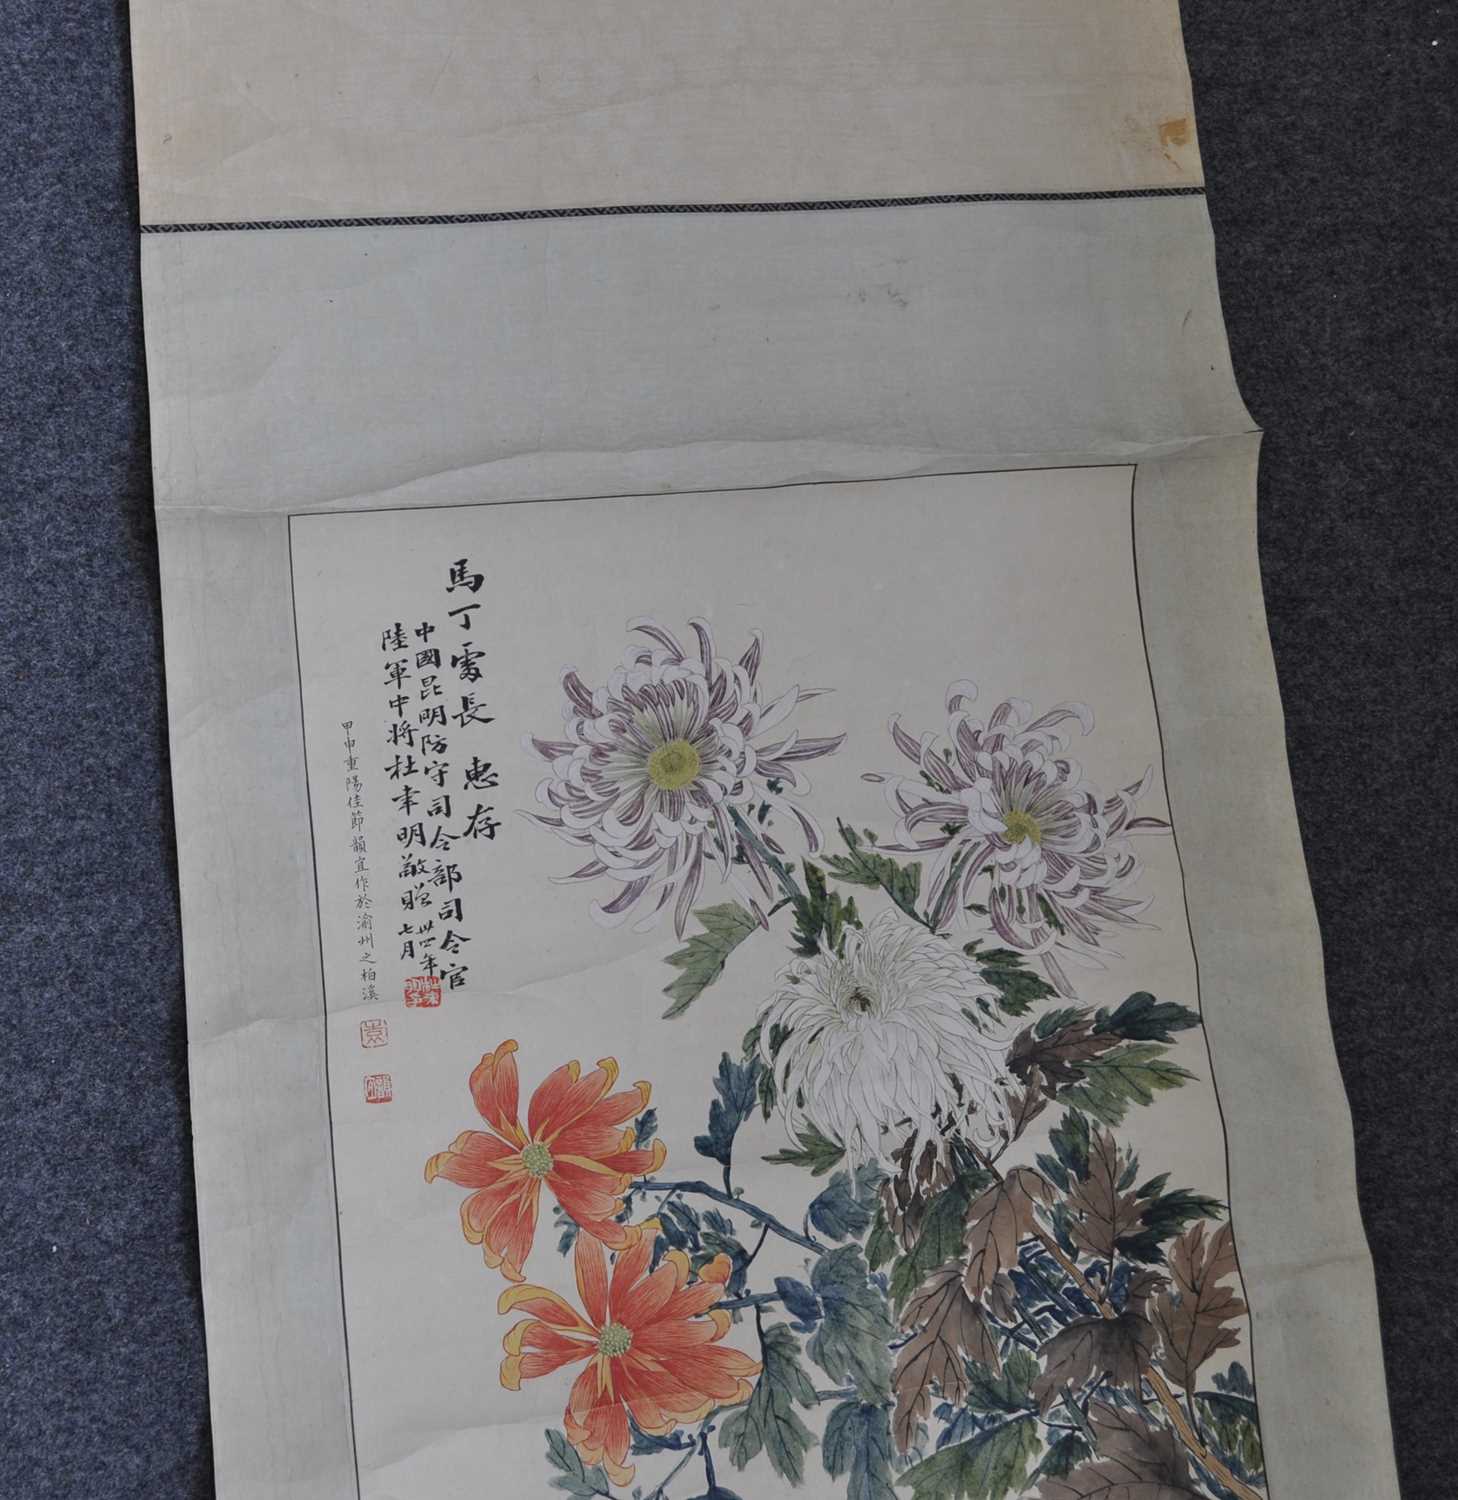 Yuan Yunyi (袁韻宜) (1920-2004) - Chrysanthemums, Republic of China scroll painting dated 1944, ink - Image 13 of 31